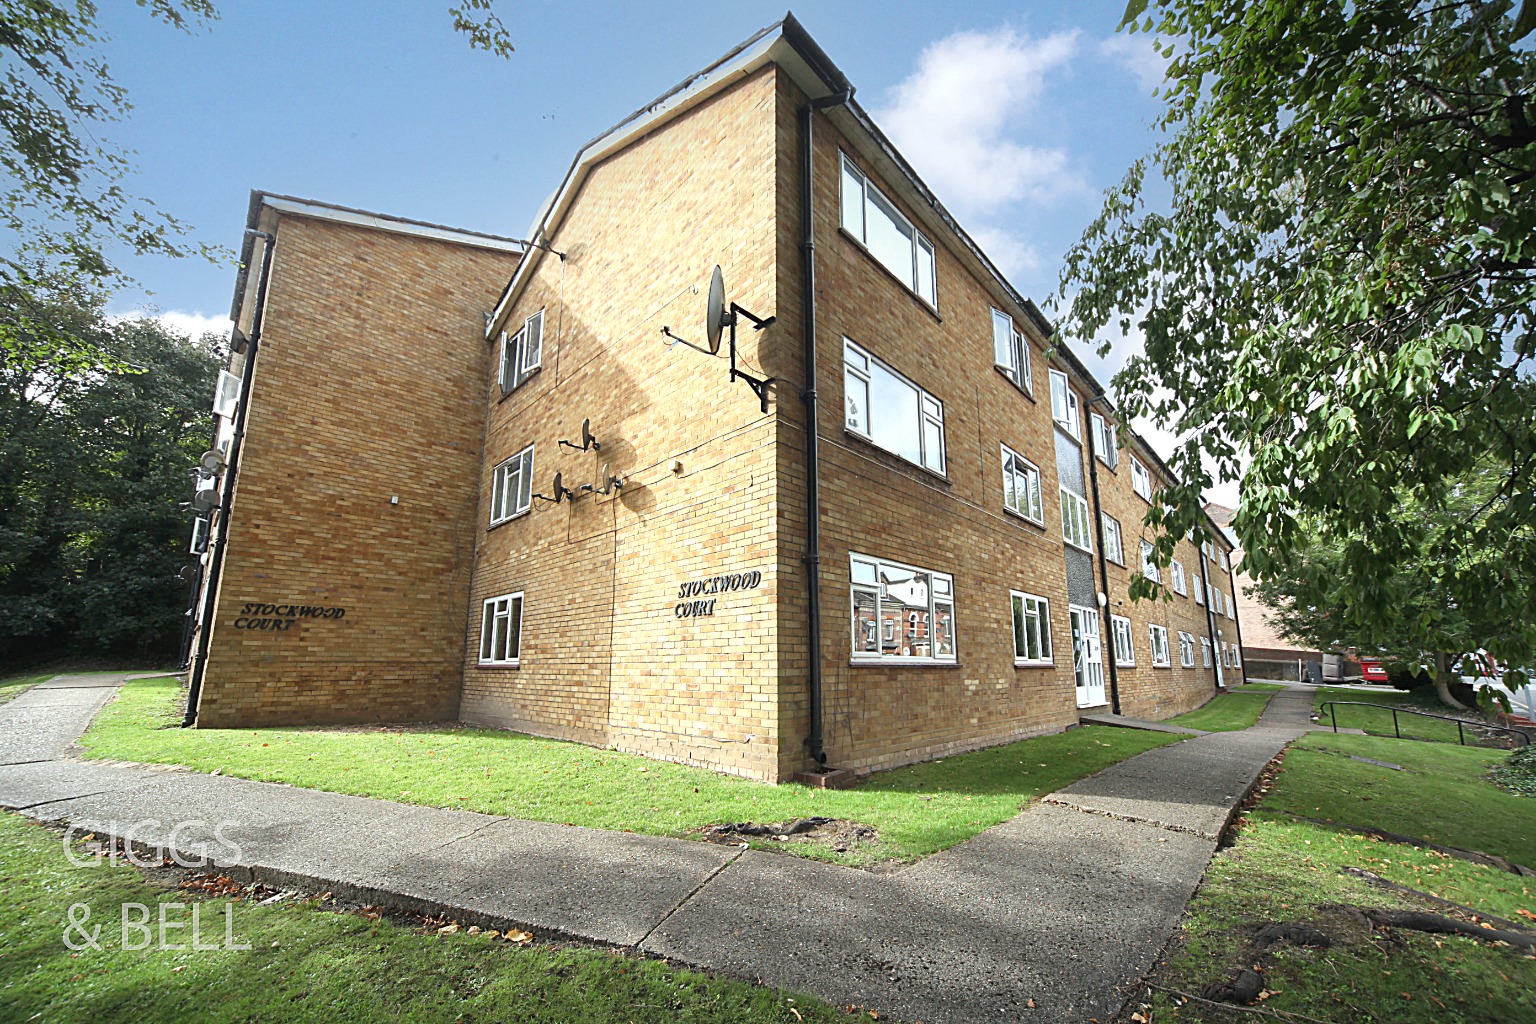 2 bed flat for sale in Stockwood Crescent, Luton, LU1 